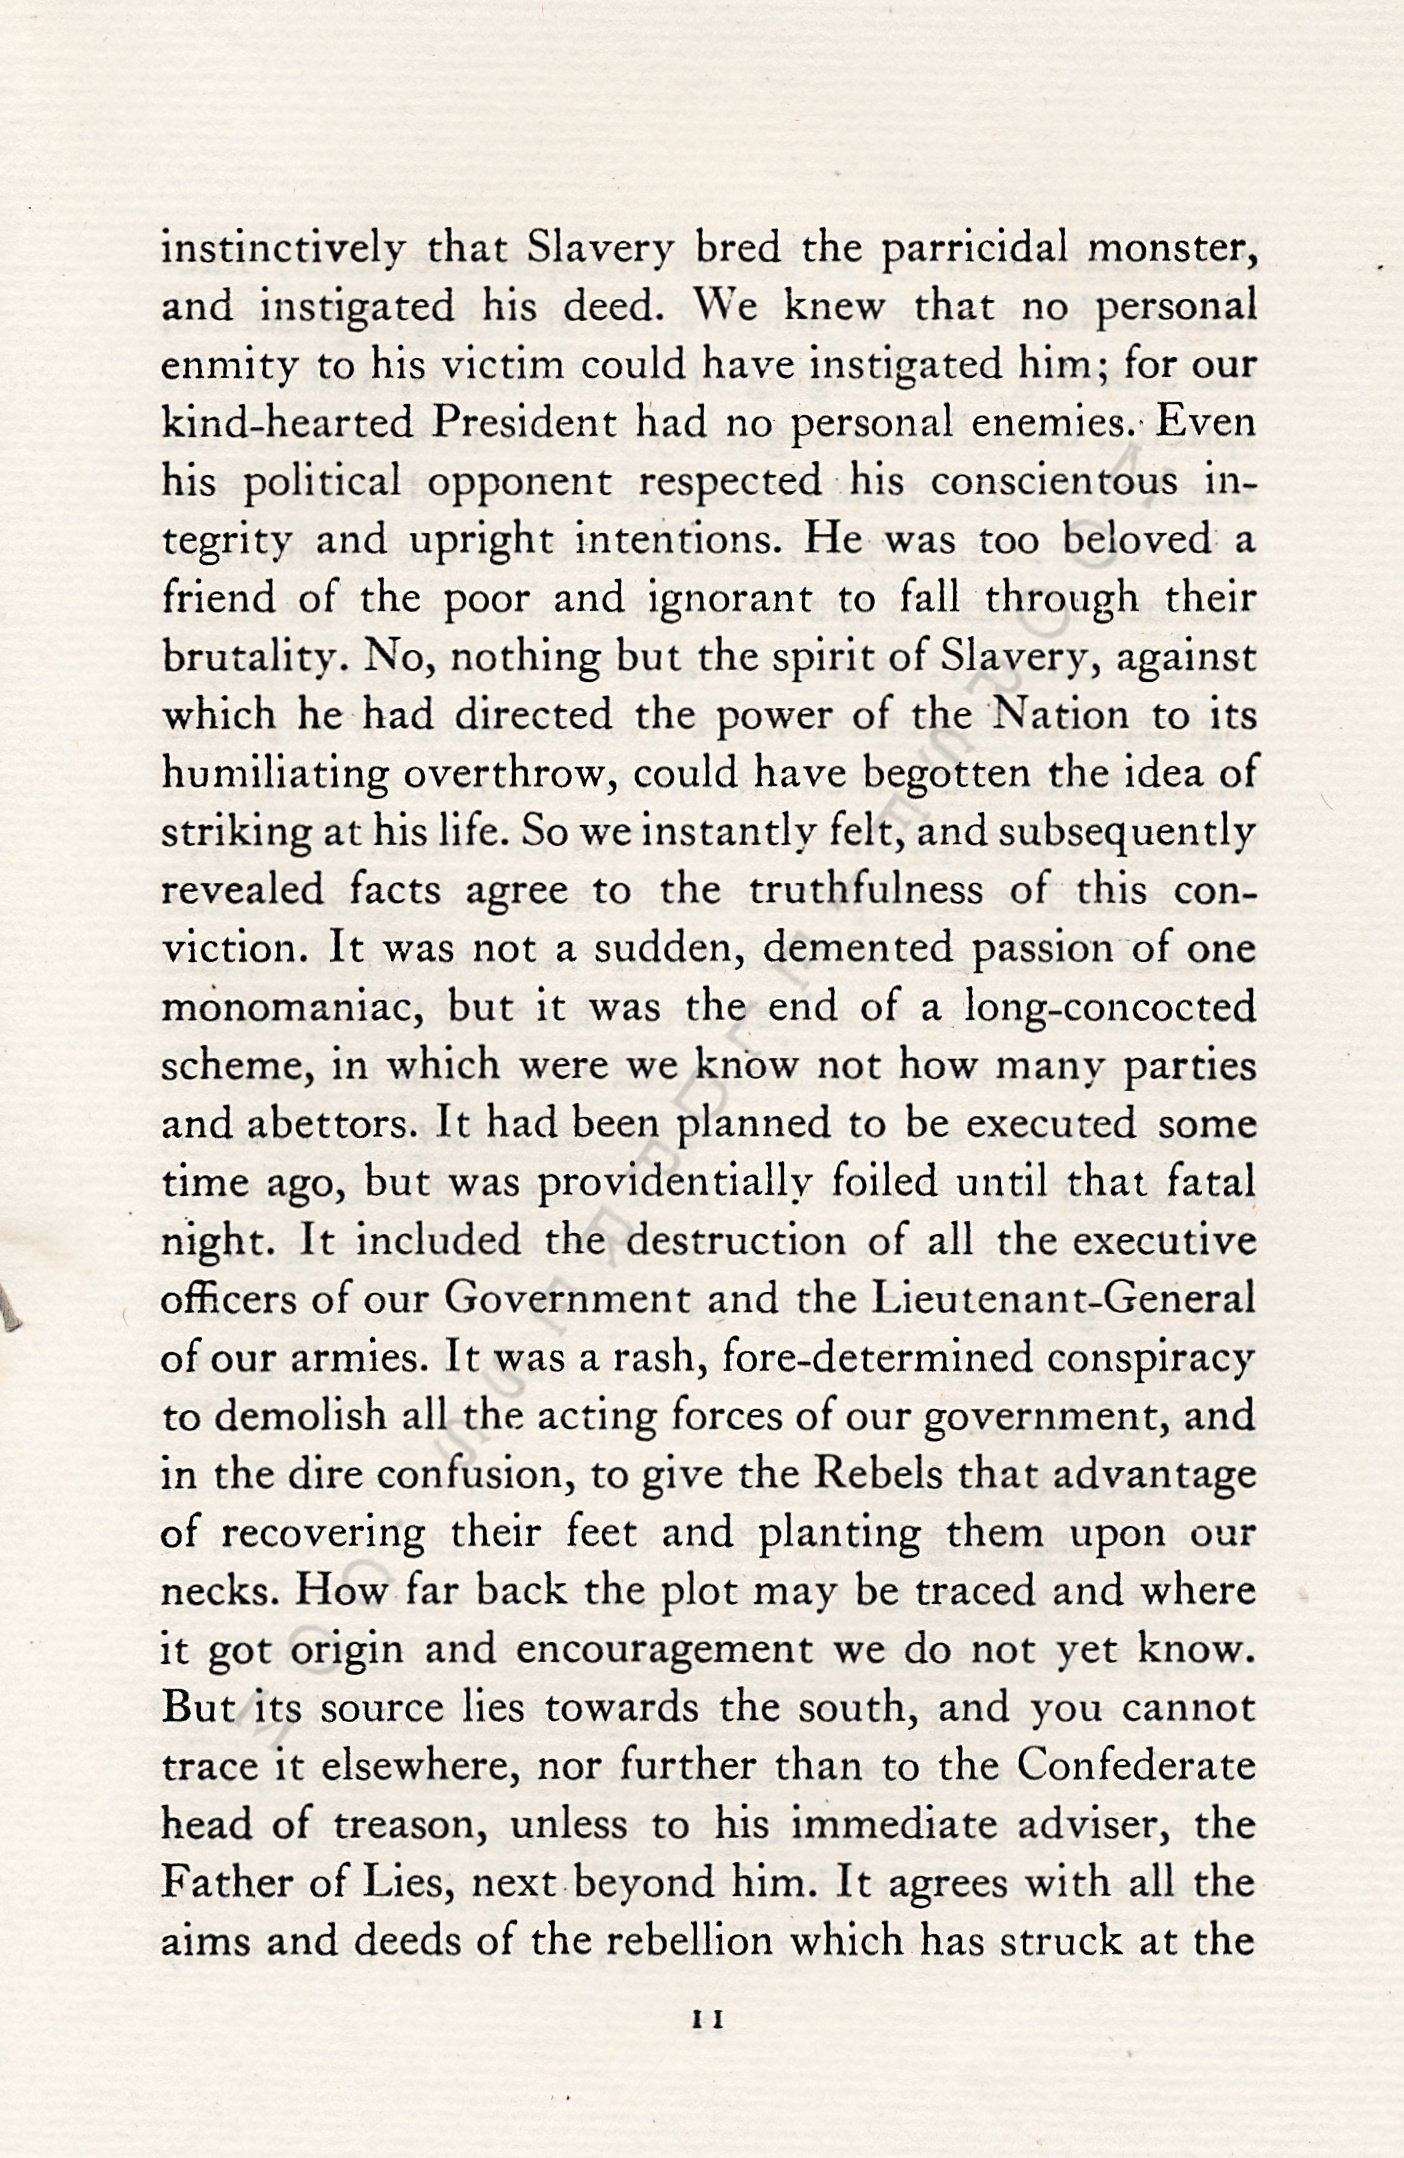 ON ACCOUNT
                      OF THE ASSASSINATION OF PRESIDENT LINCOLN BY
                      MORTIMER BLAKE